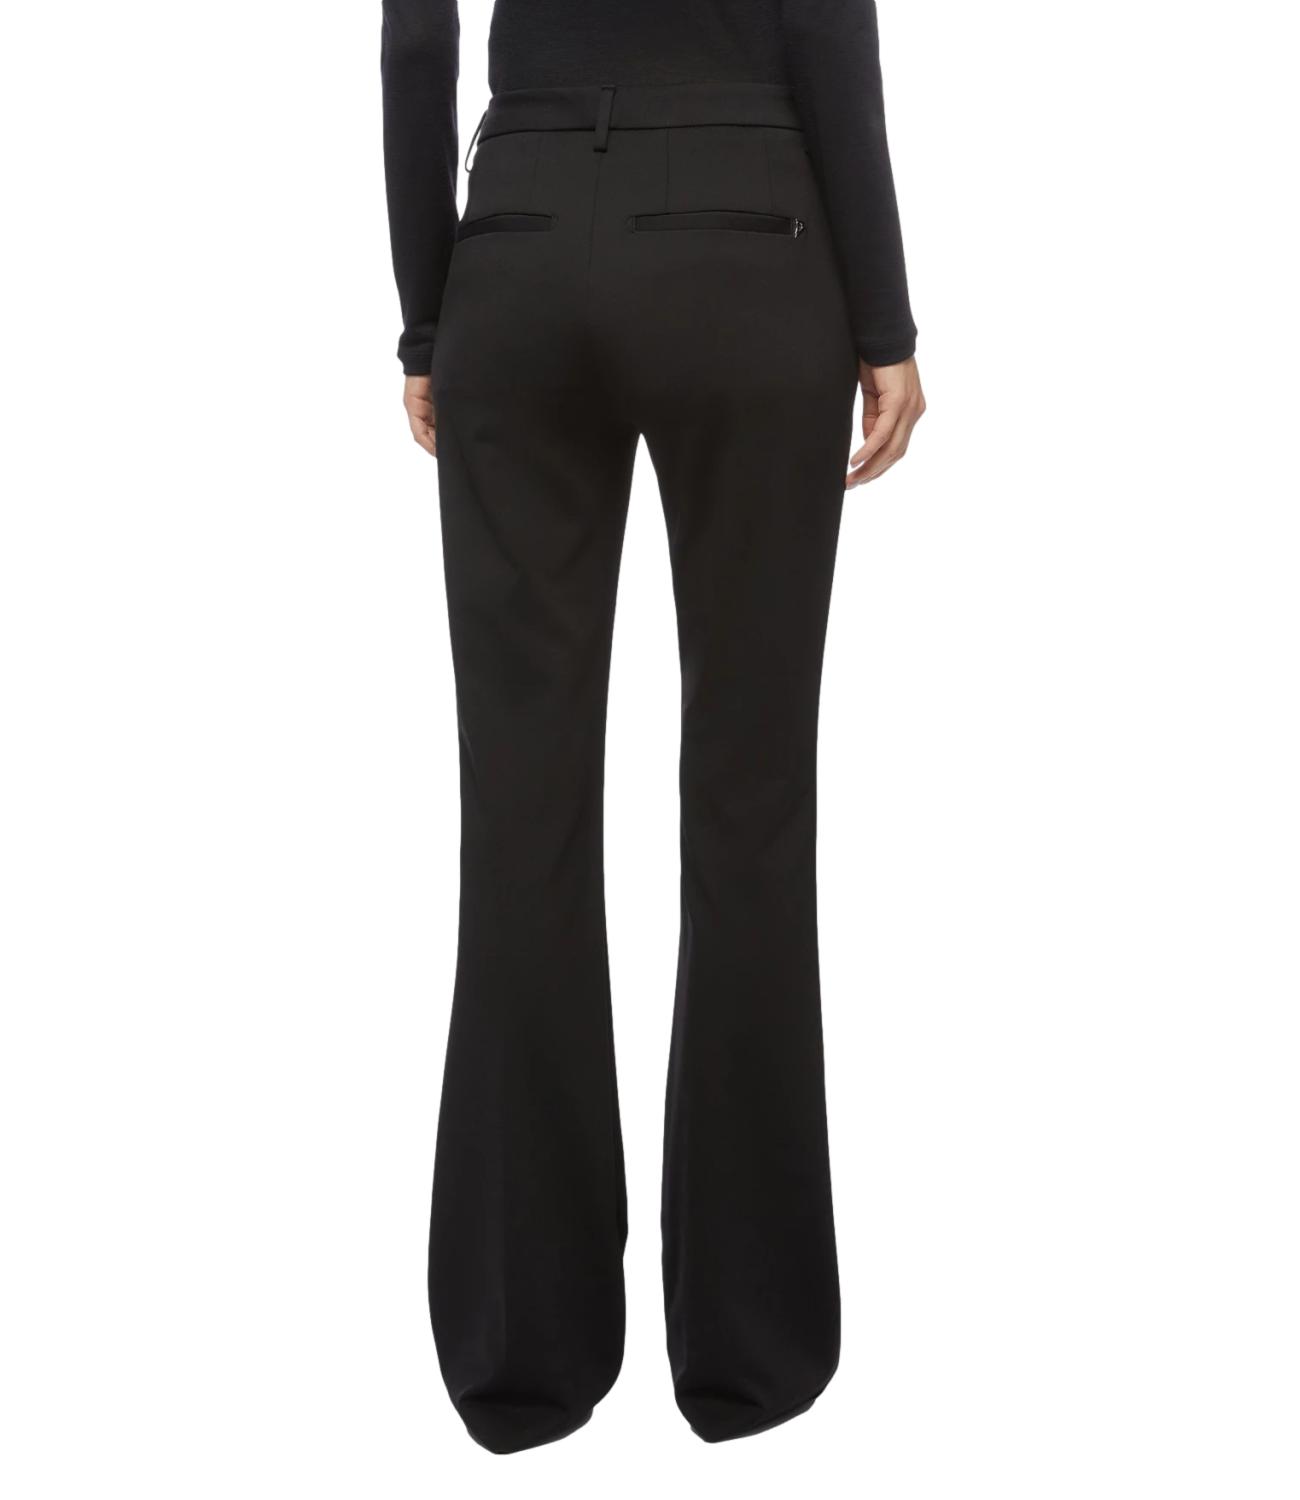 DONDUP Women's black flared trousers